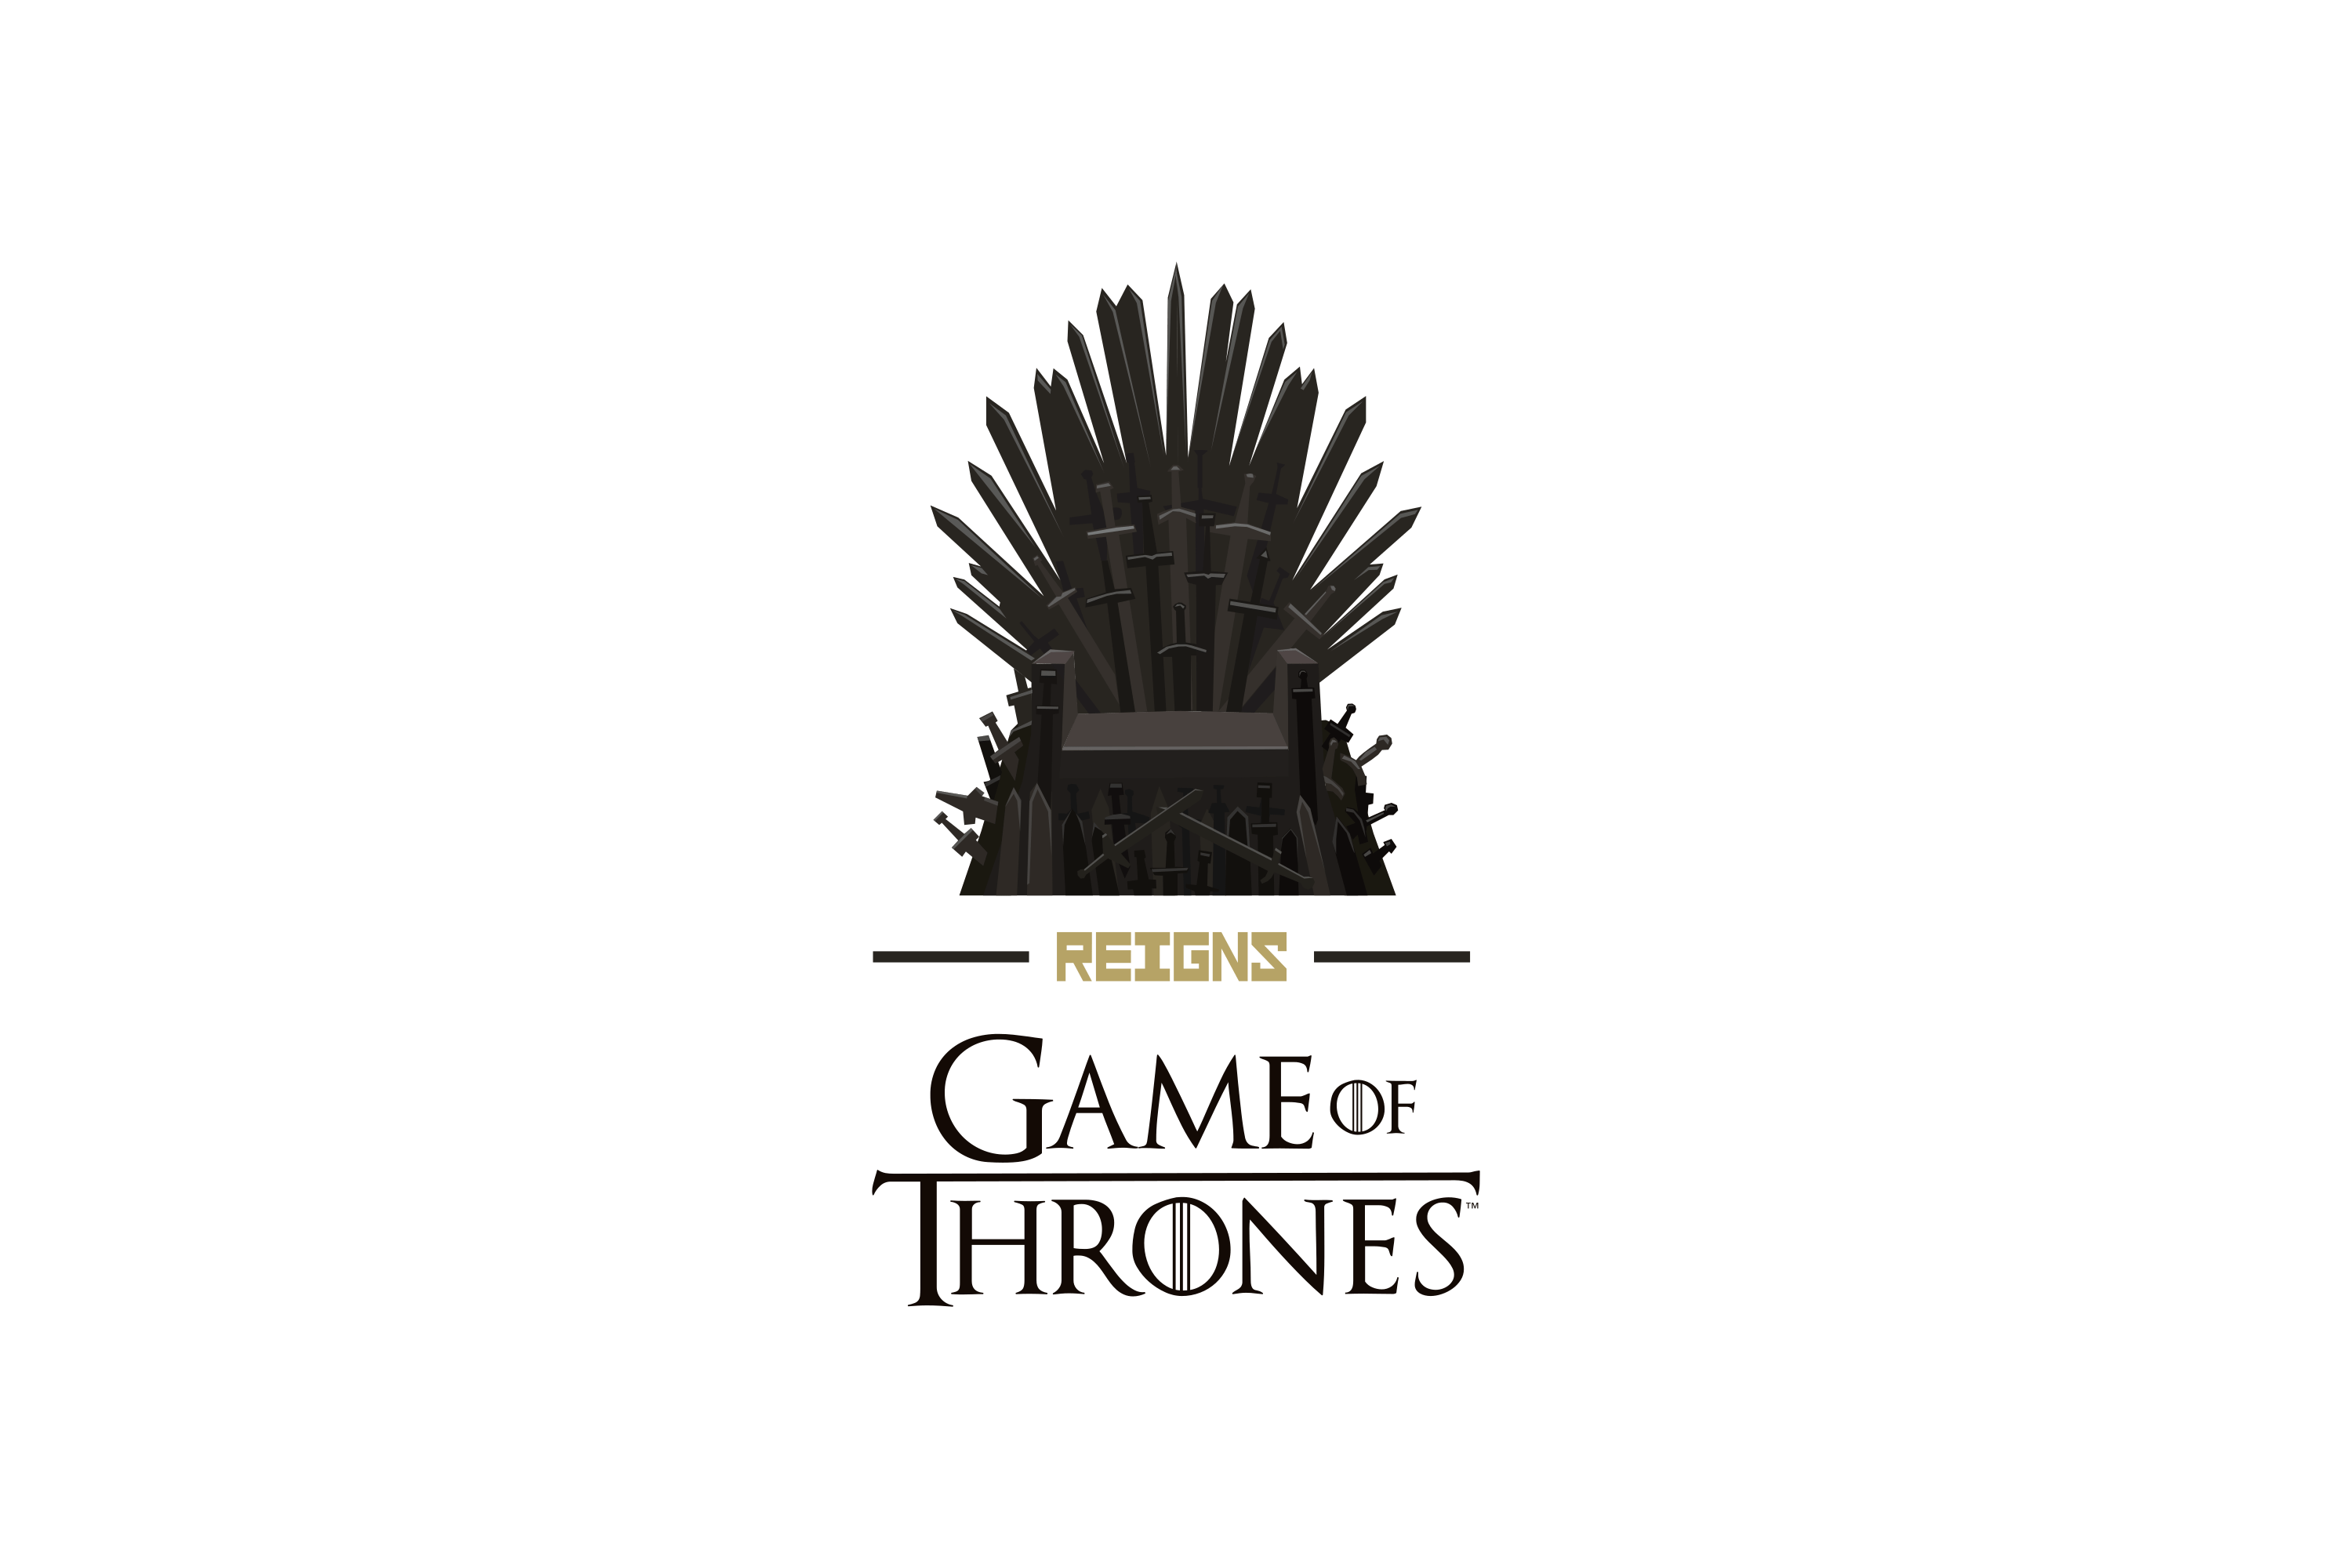 Download Reigns: Game of Thrones Logo in SVG Vector or PNG File Format